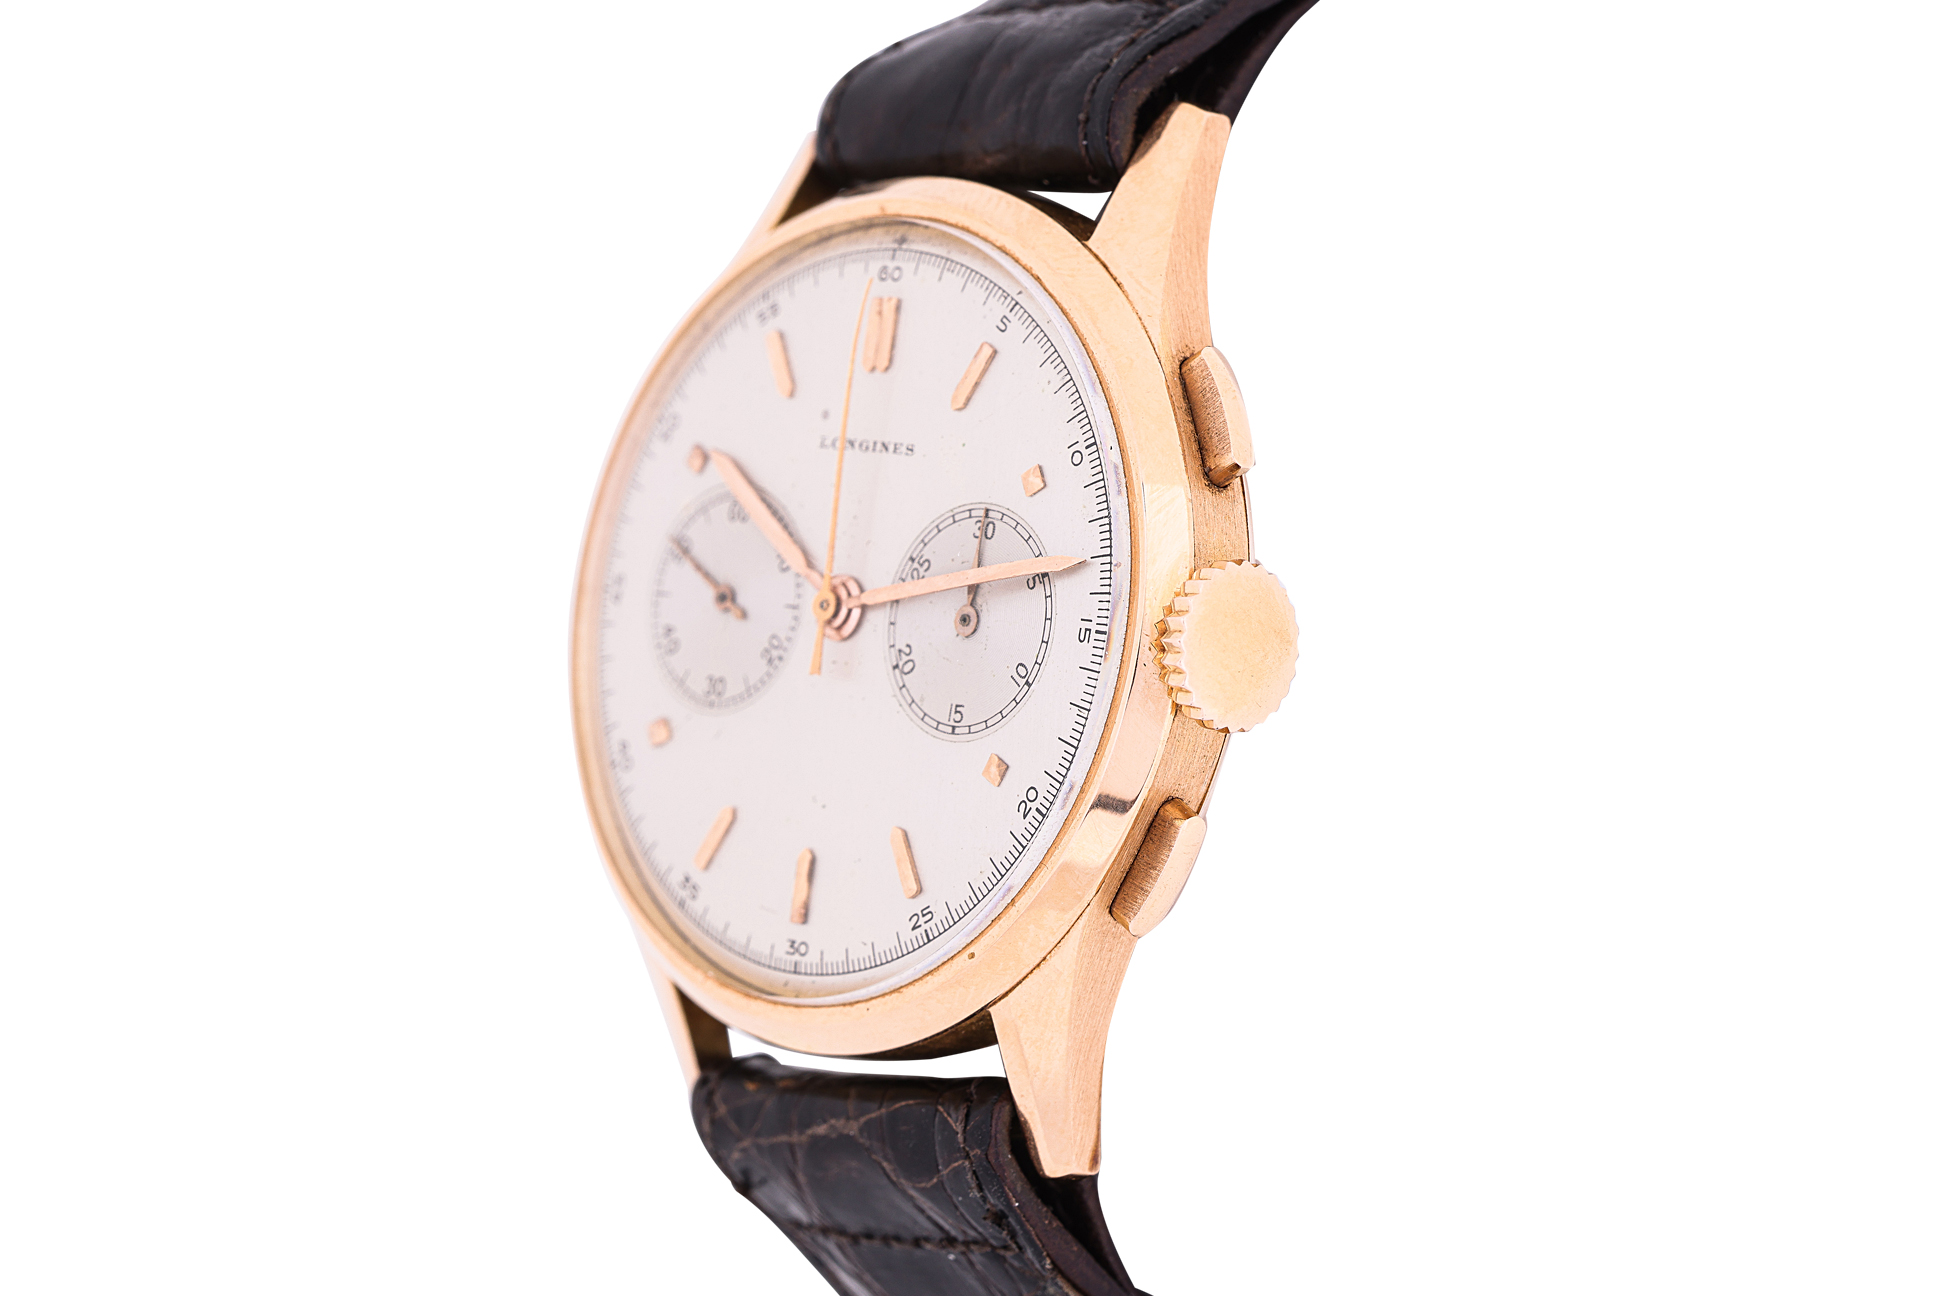 A LONGINES GOLD 13ZN FLYBACK CHRONOGRAPH WATCH - Image 2 of 10